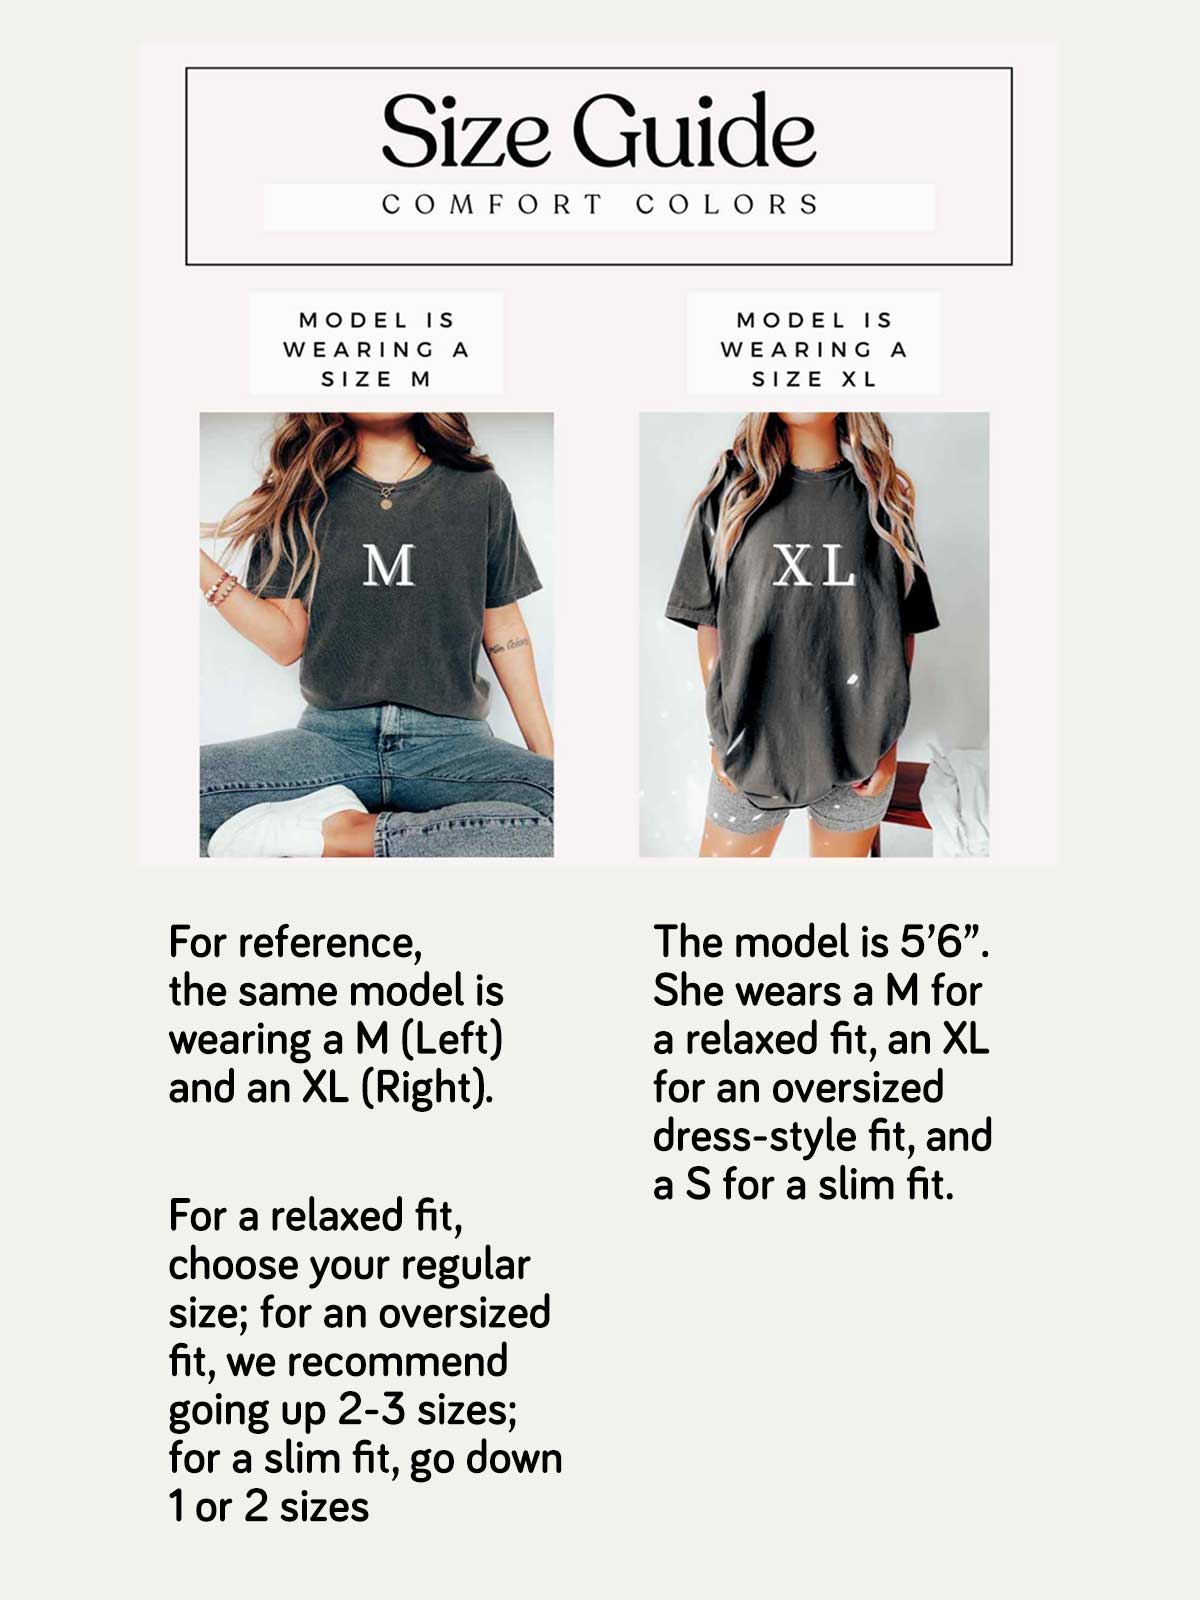 the size guide for a women's t - shirt